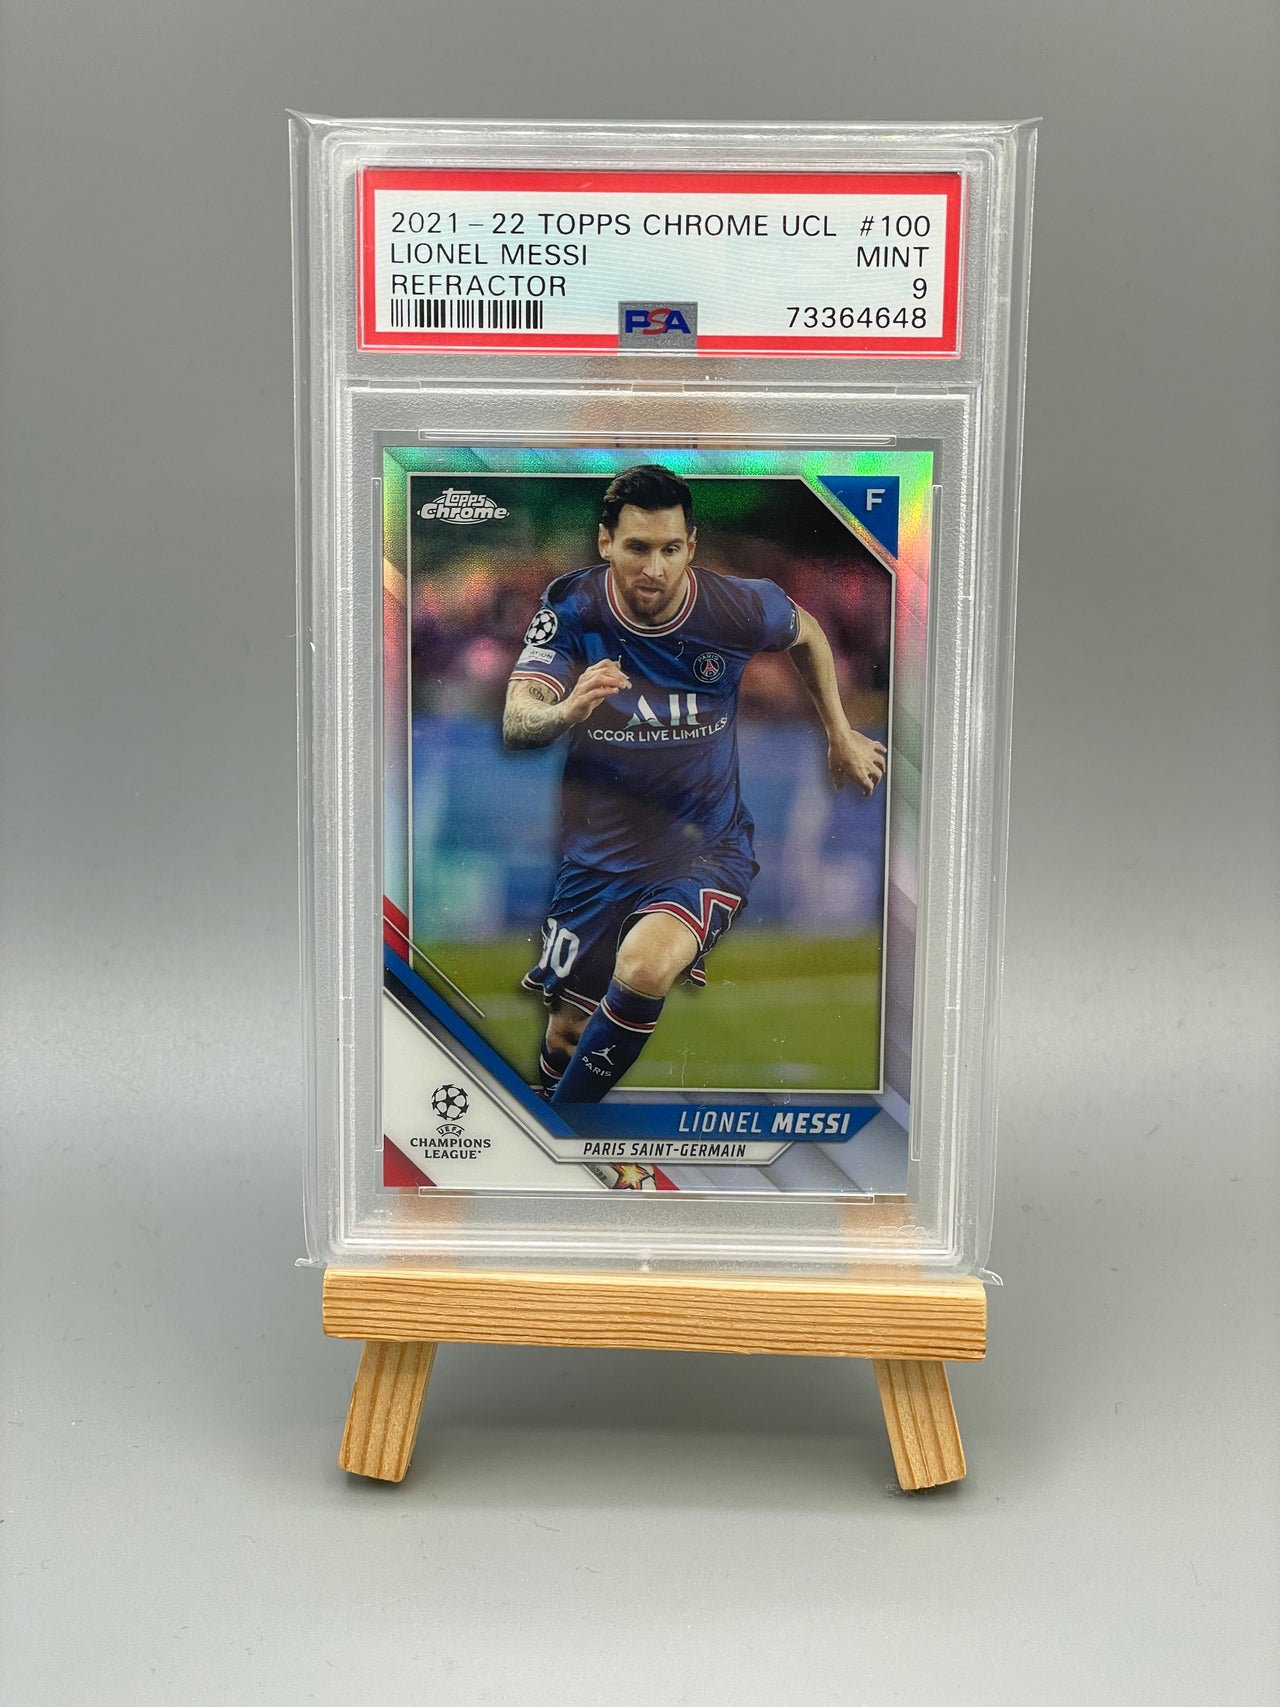 Fussball -  Topps - Chrome UCL - Messi Refractor PSA 9